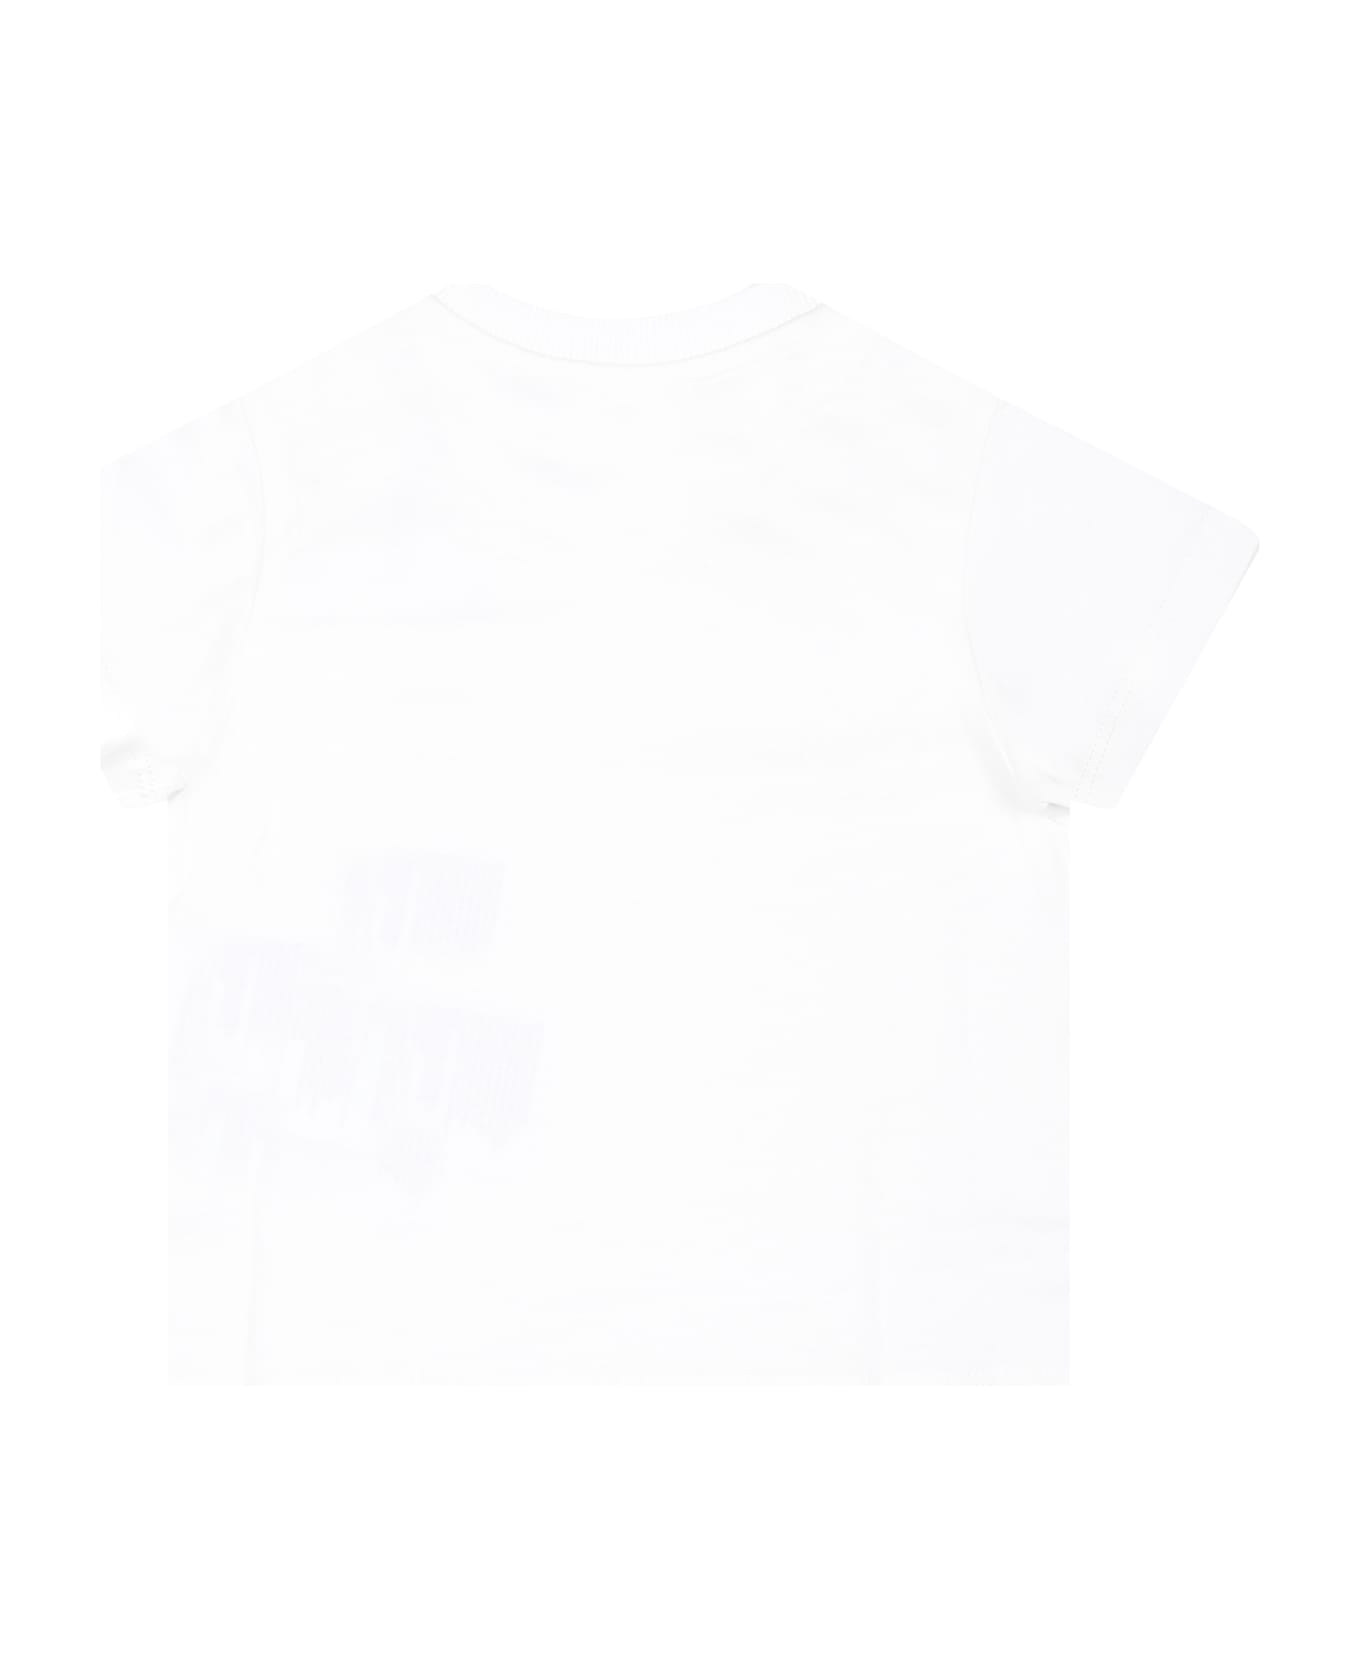 Moschino White T-shirt For Baby Boy With Teddy Bear And Logo - White Tシャツ＆ポロシャツ